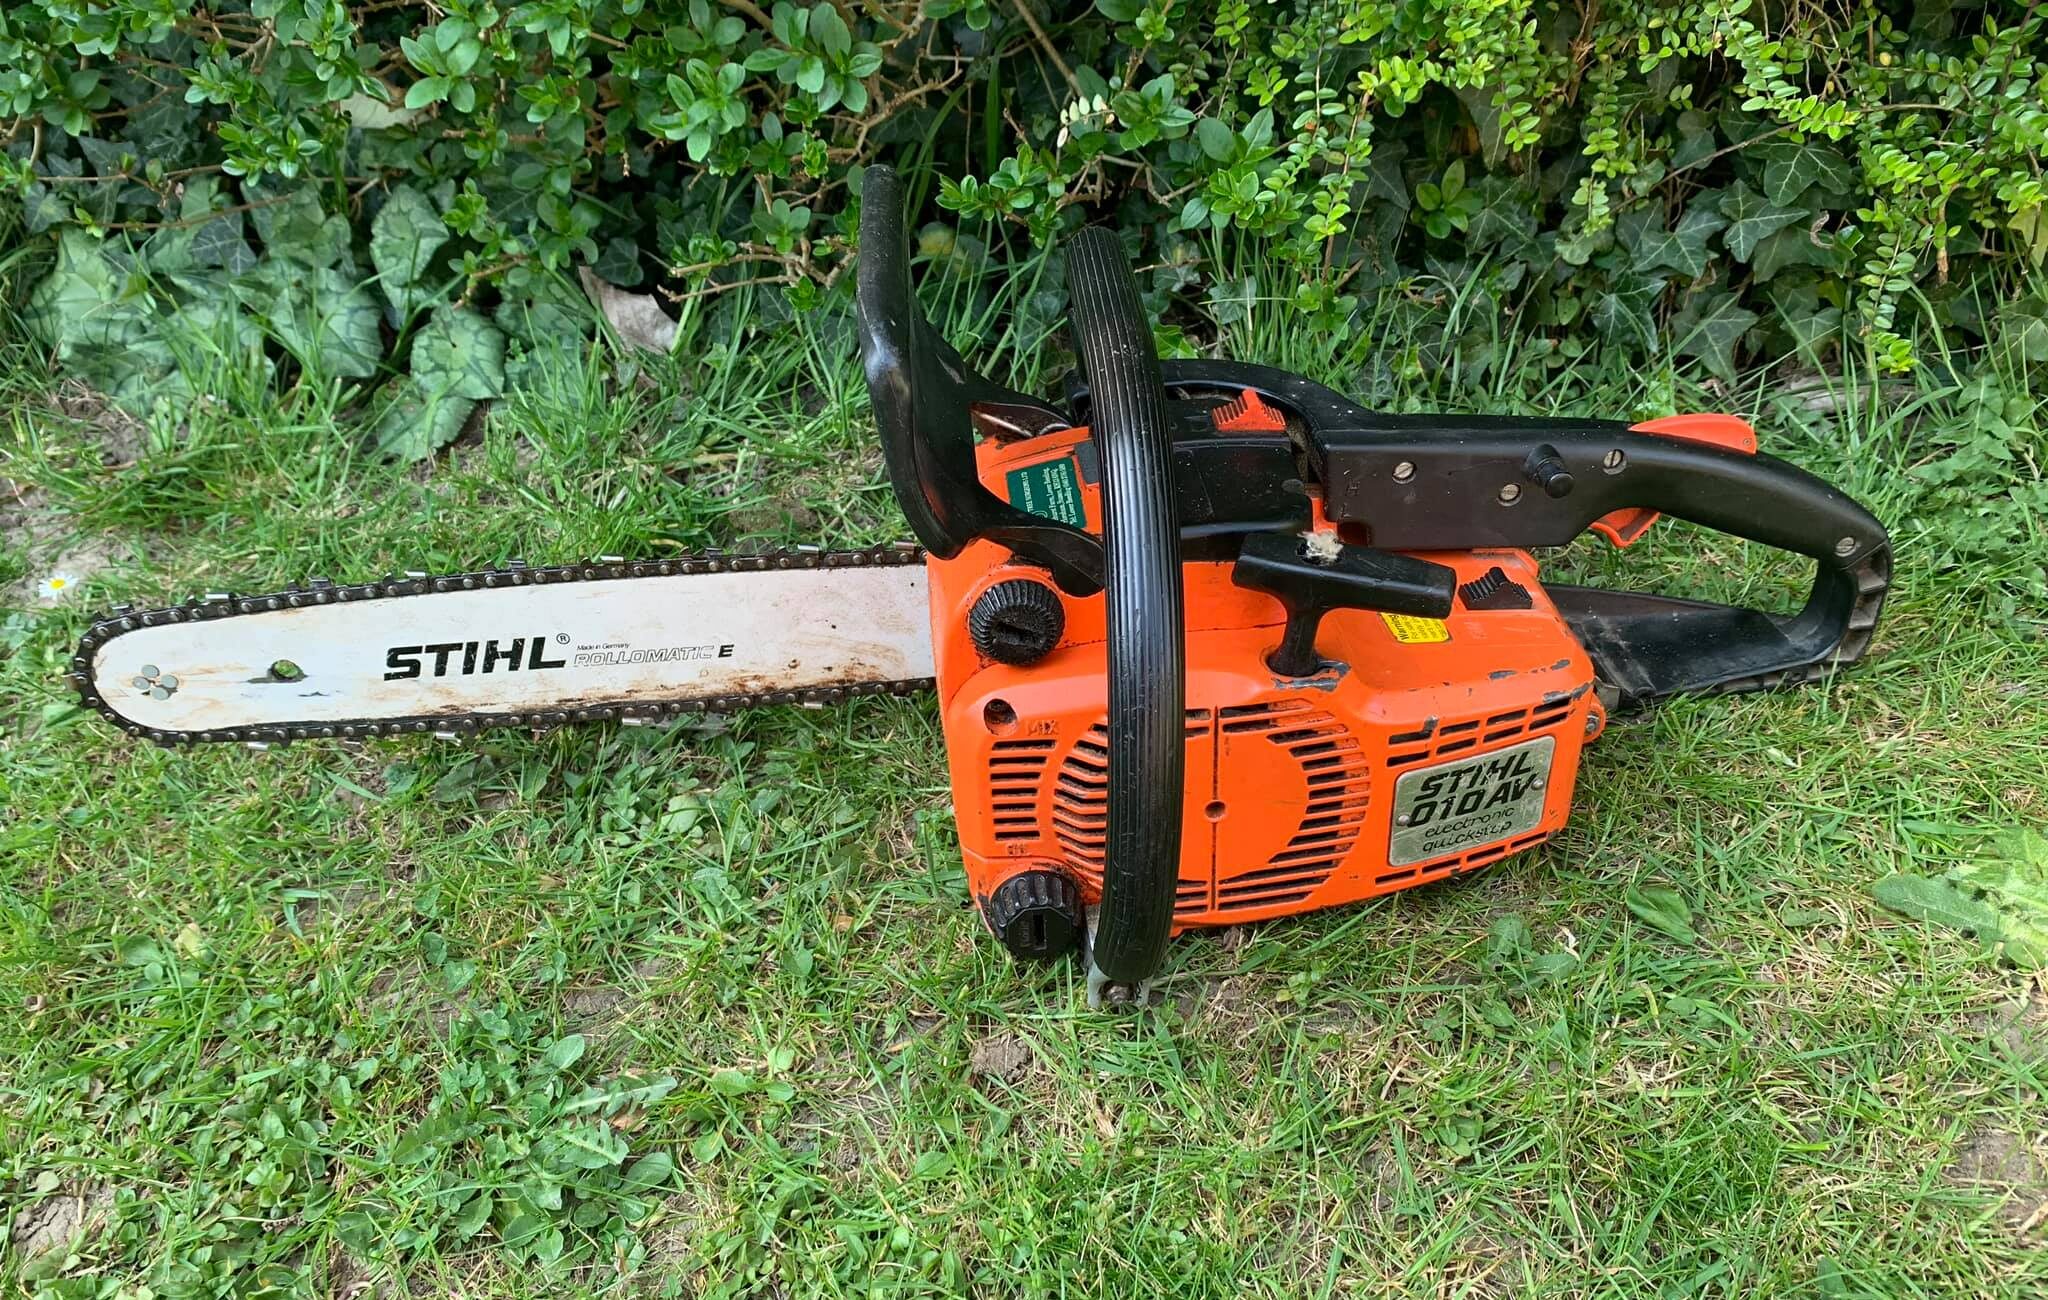 Stihl 010 chainsaw review